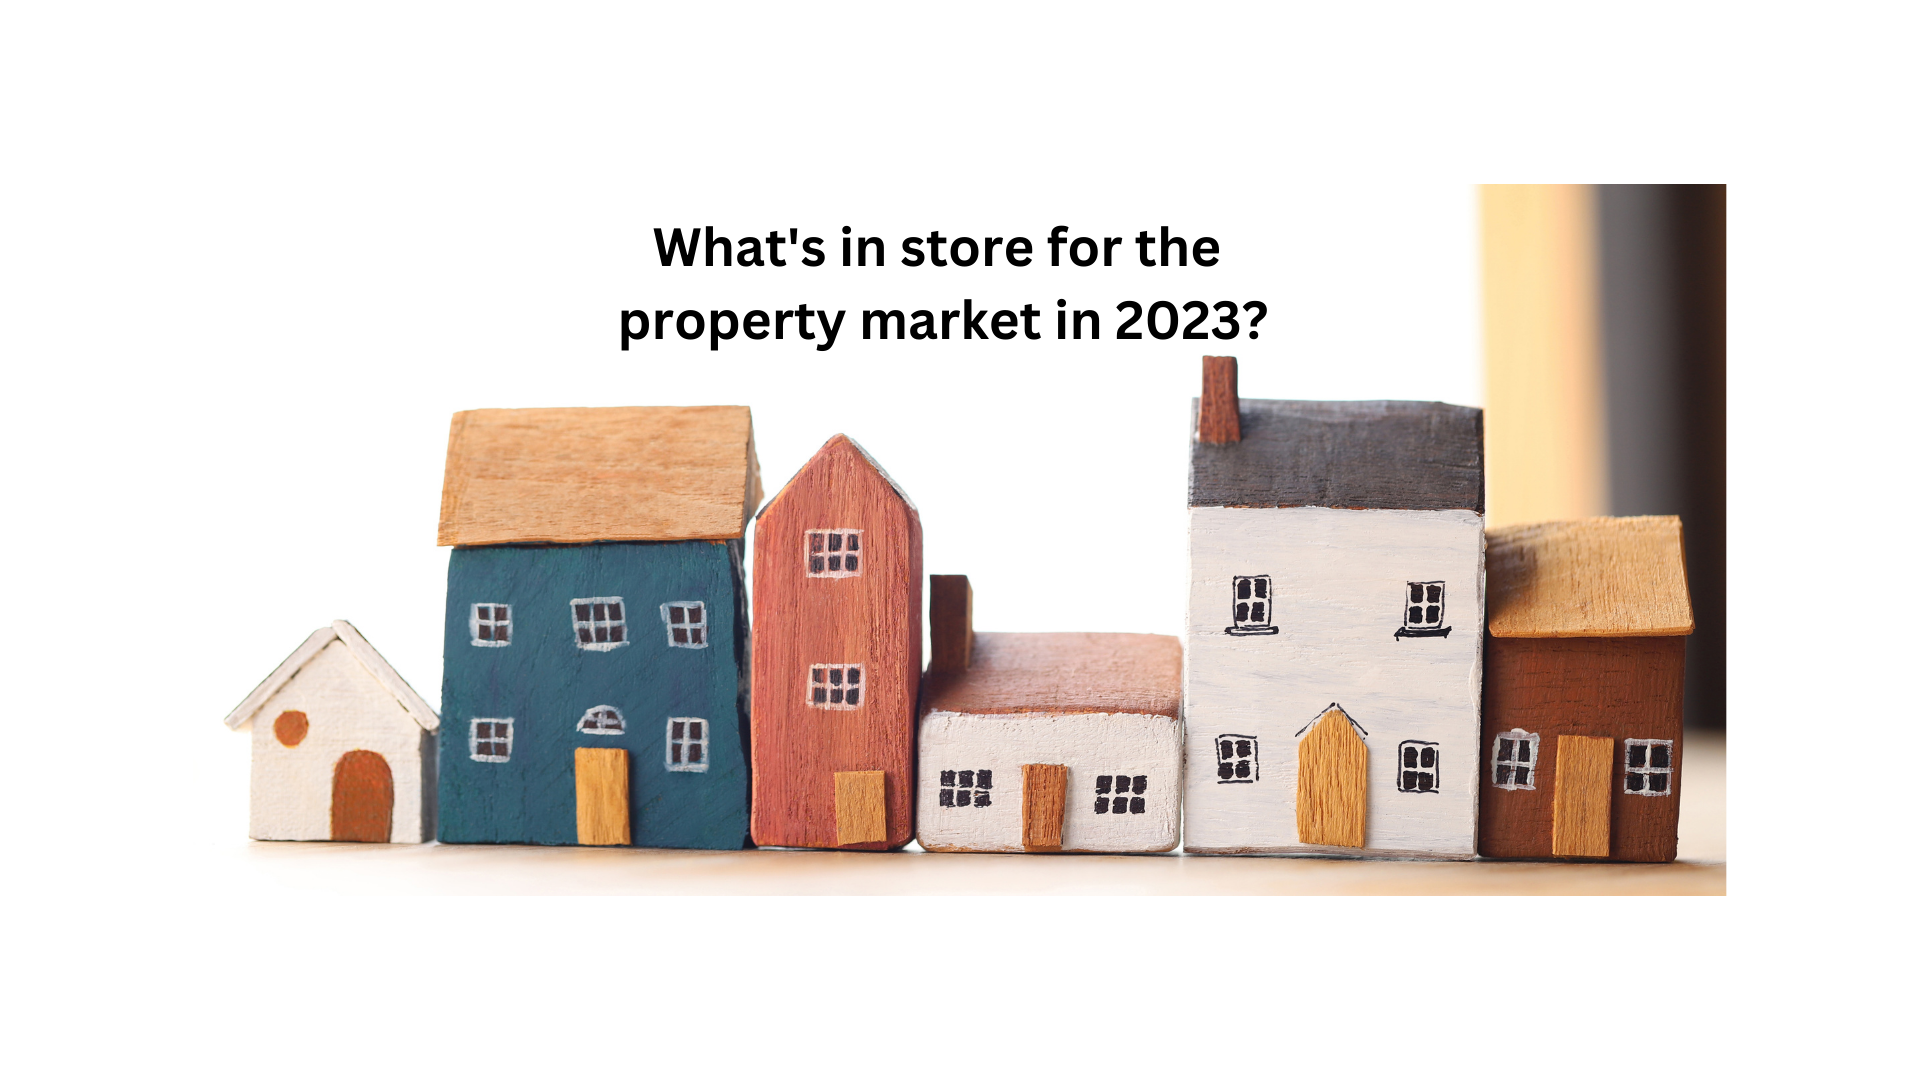 What’s in store for the property market in 2023?